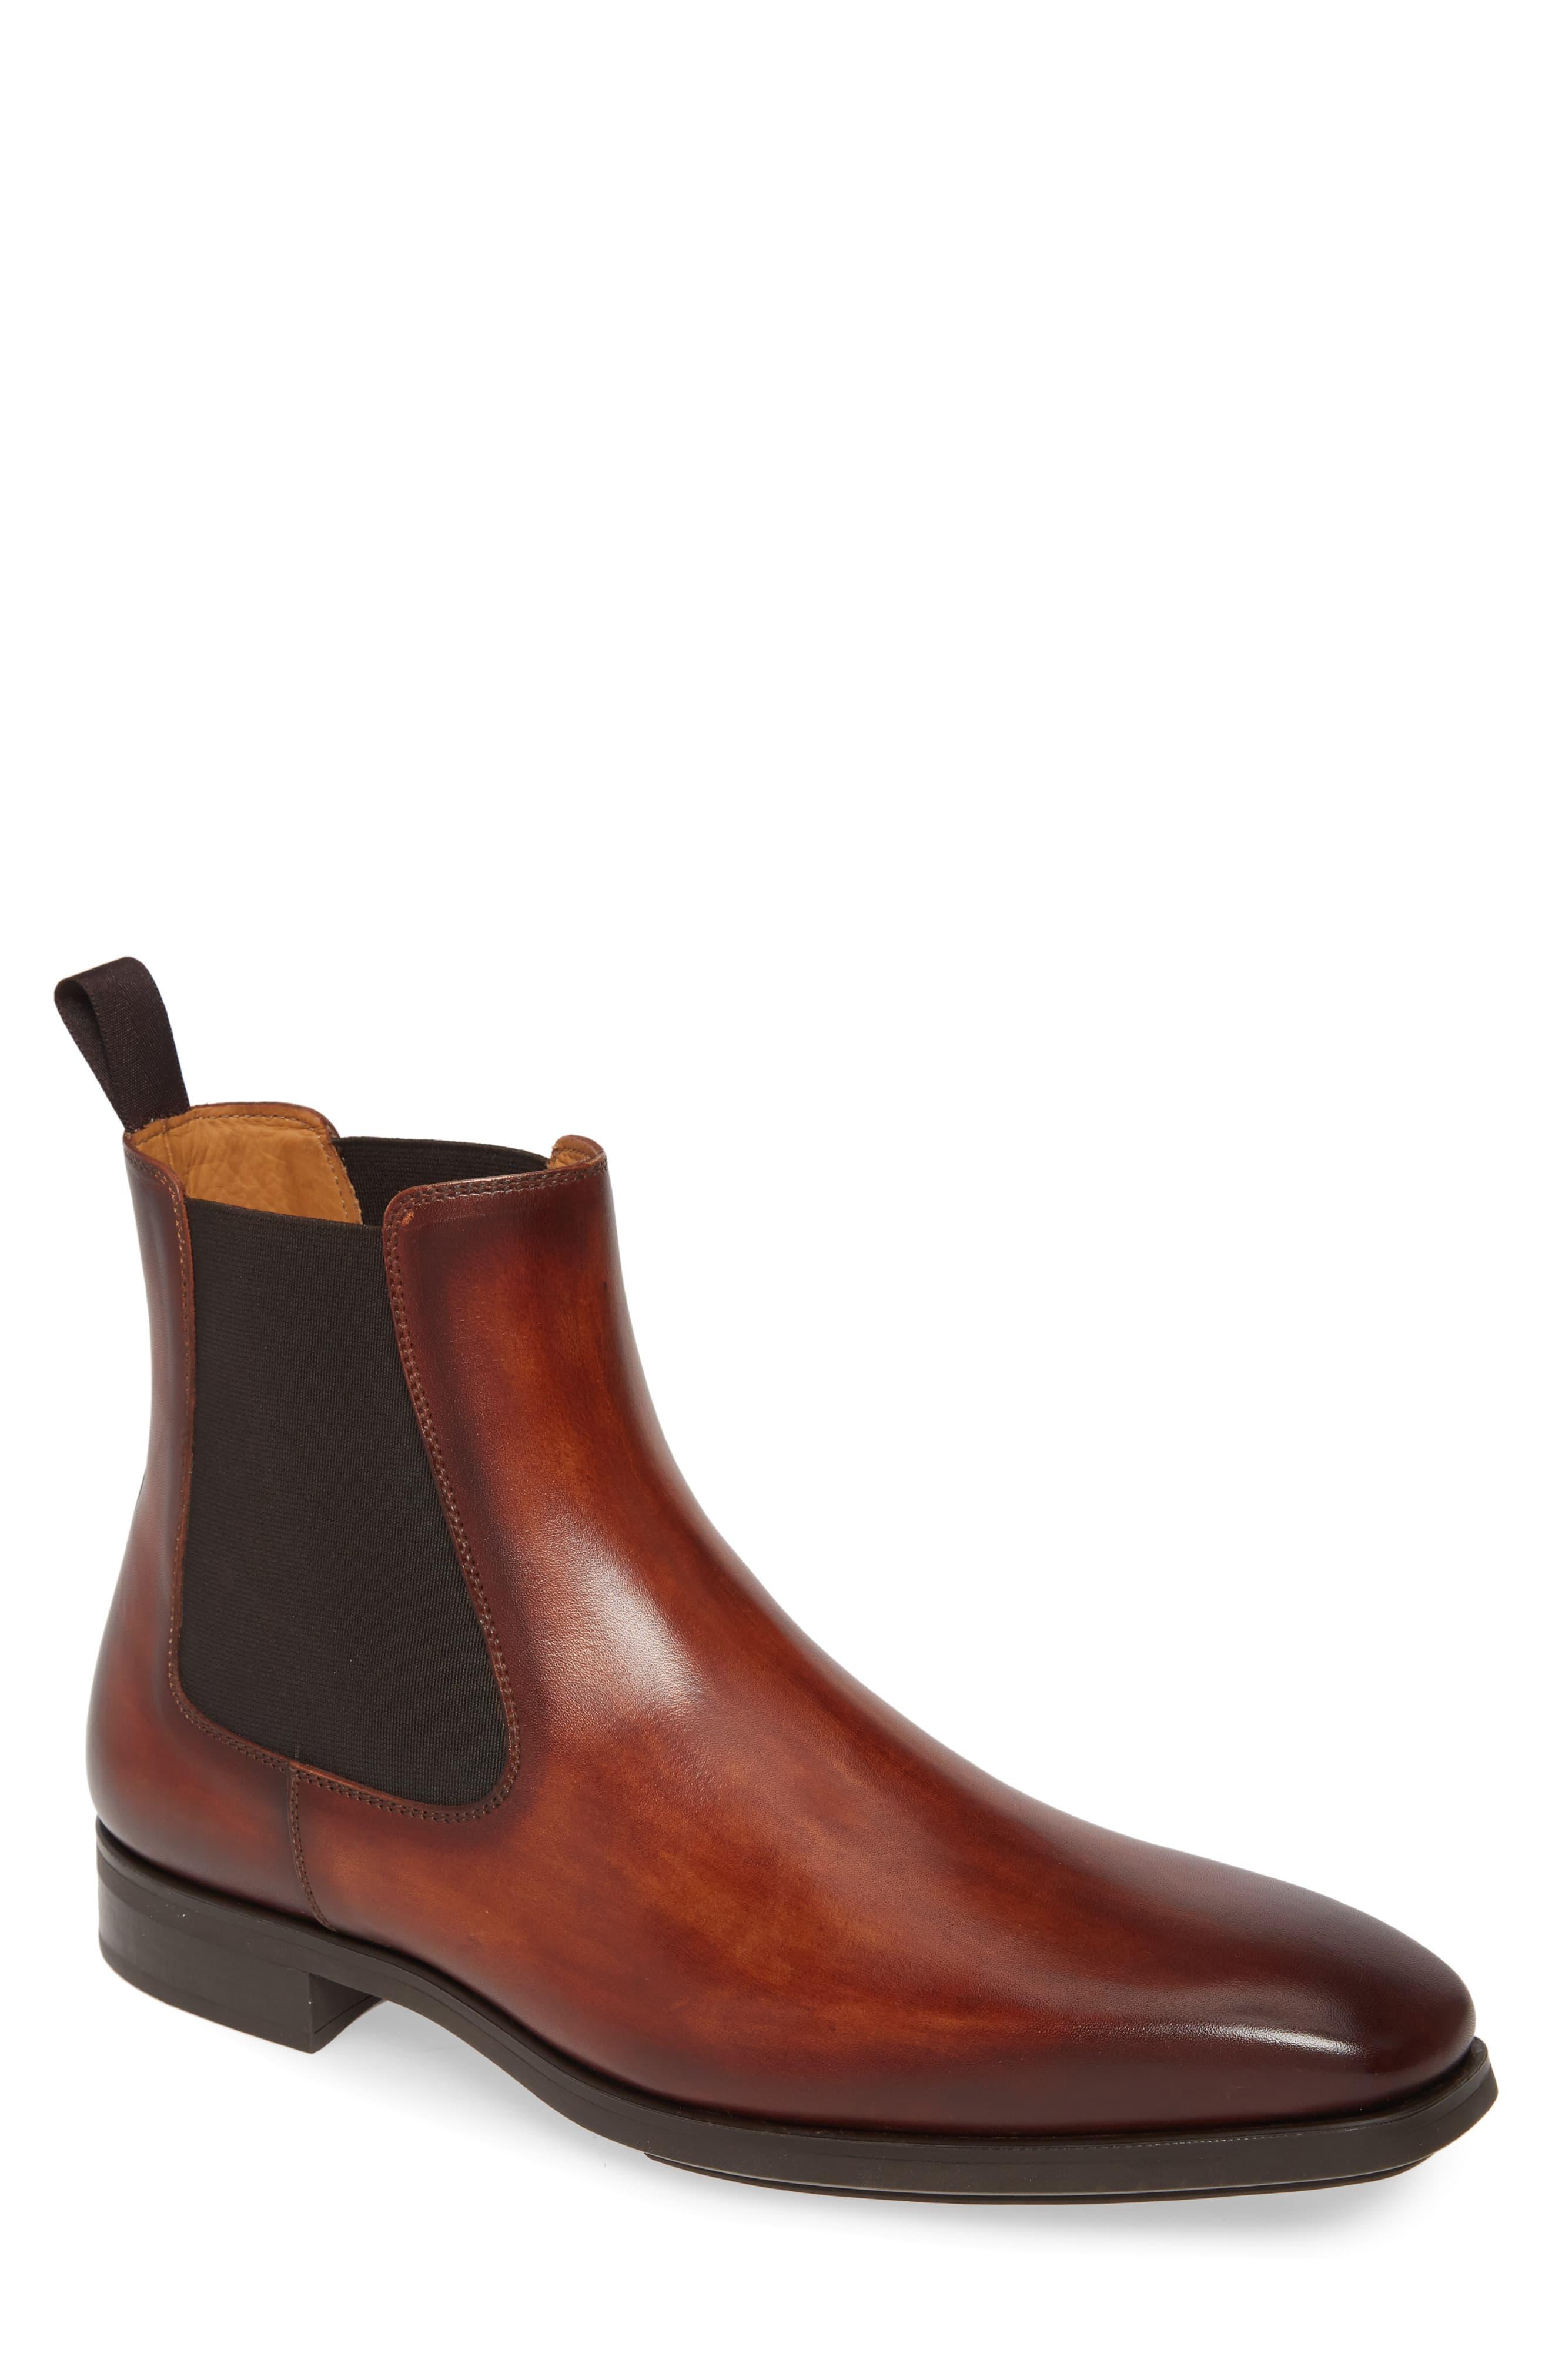 Magnanni Leather Riley Diversa Chelsea Boot in Cognac Leather (Brown ...